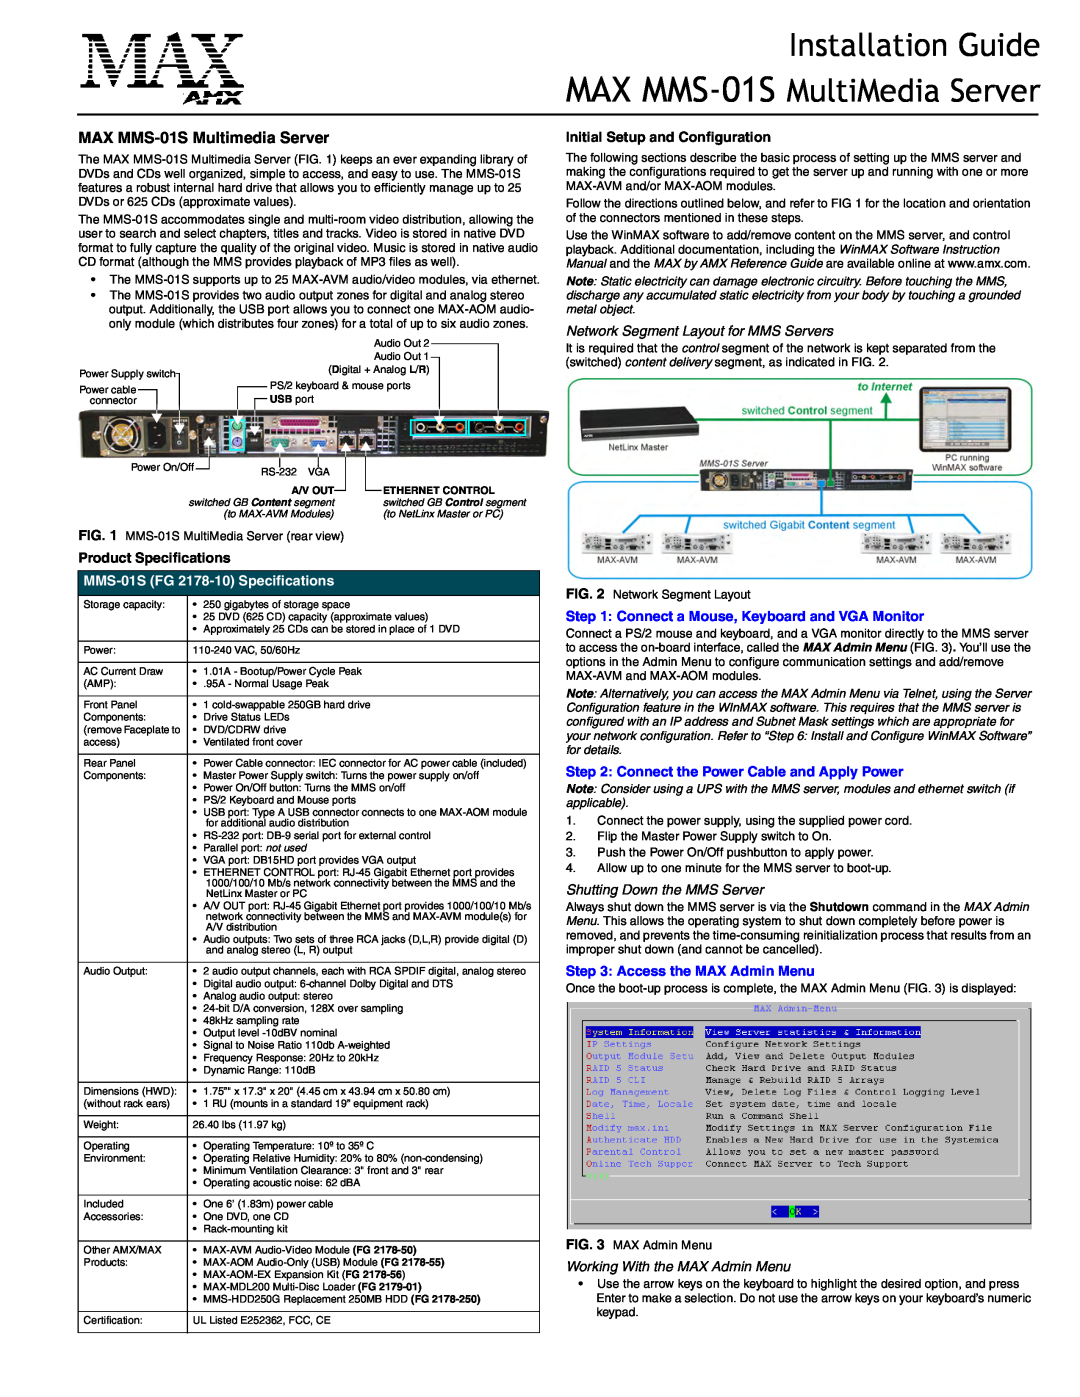 AMX MAX MMS-01S specifications Network Segment Layout for MMS Servers, Connect a Mouse, Keyboard and VGA Monitor 